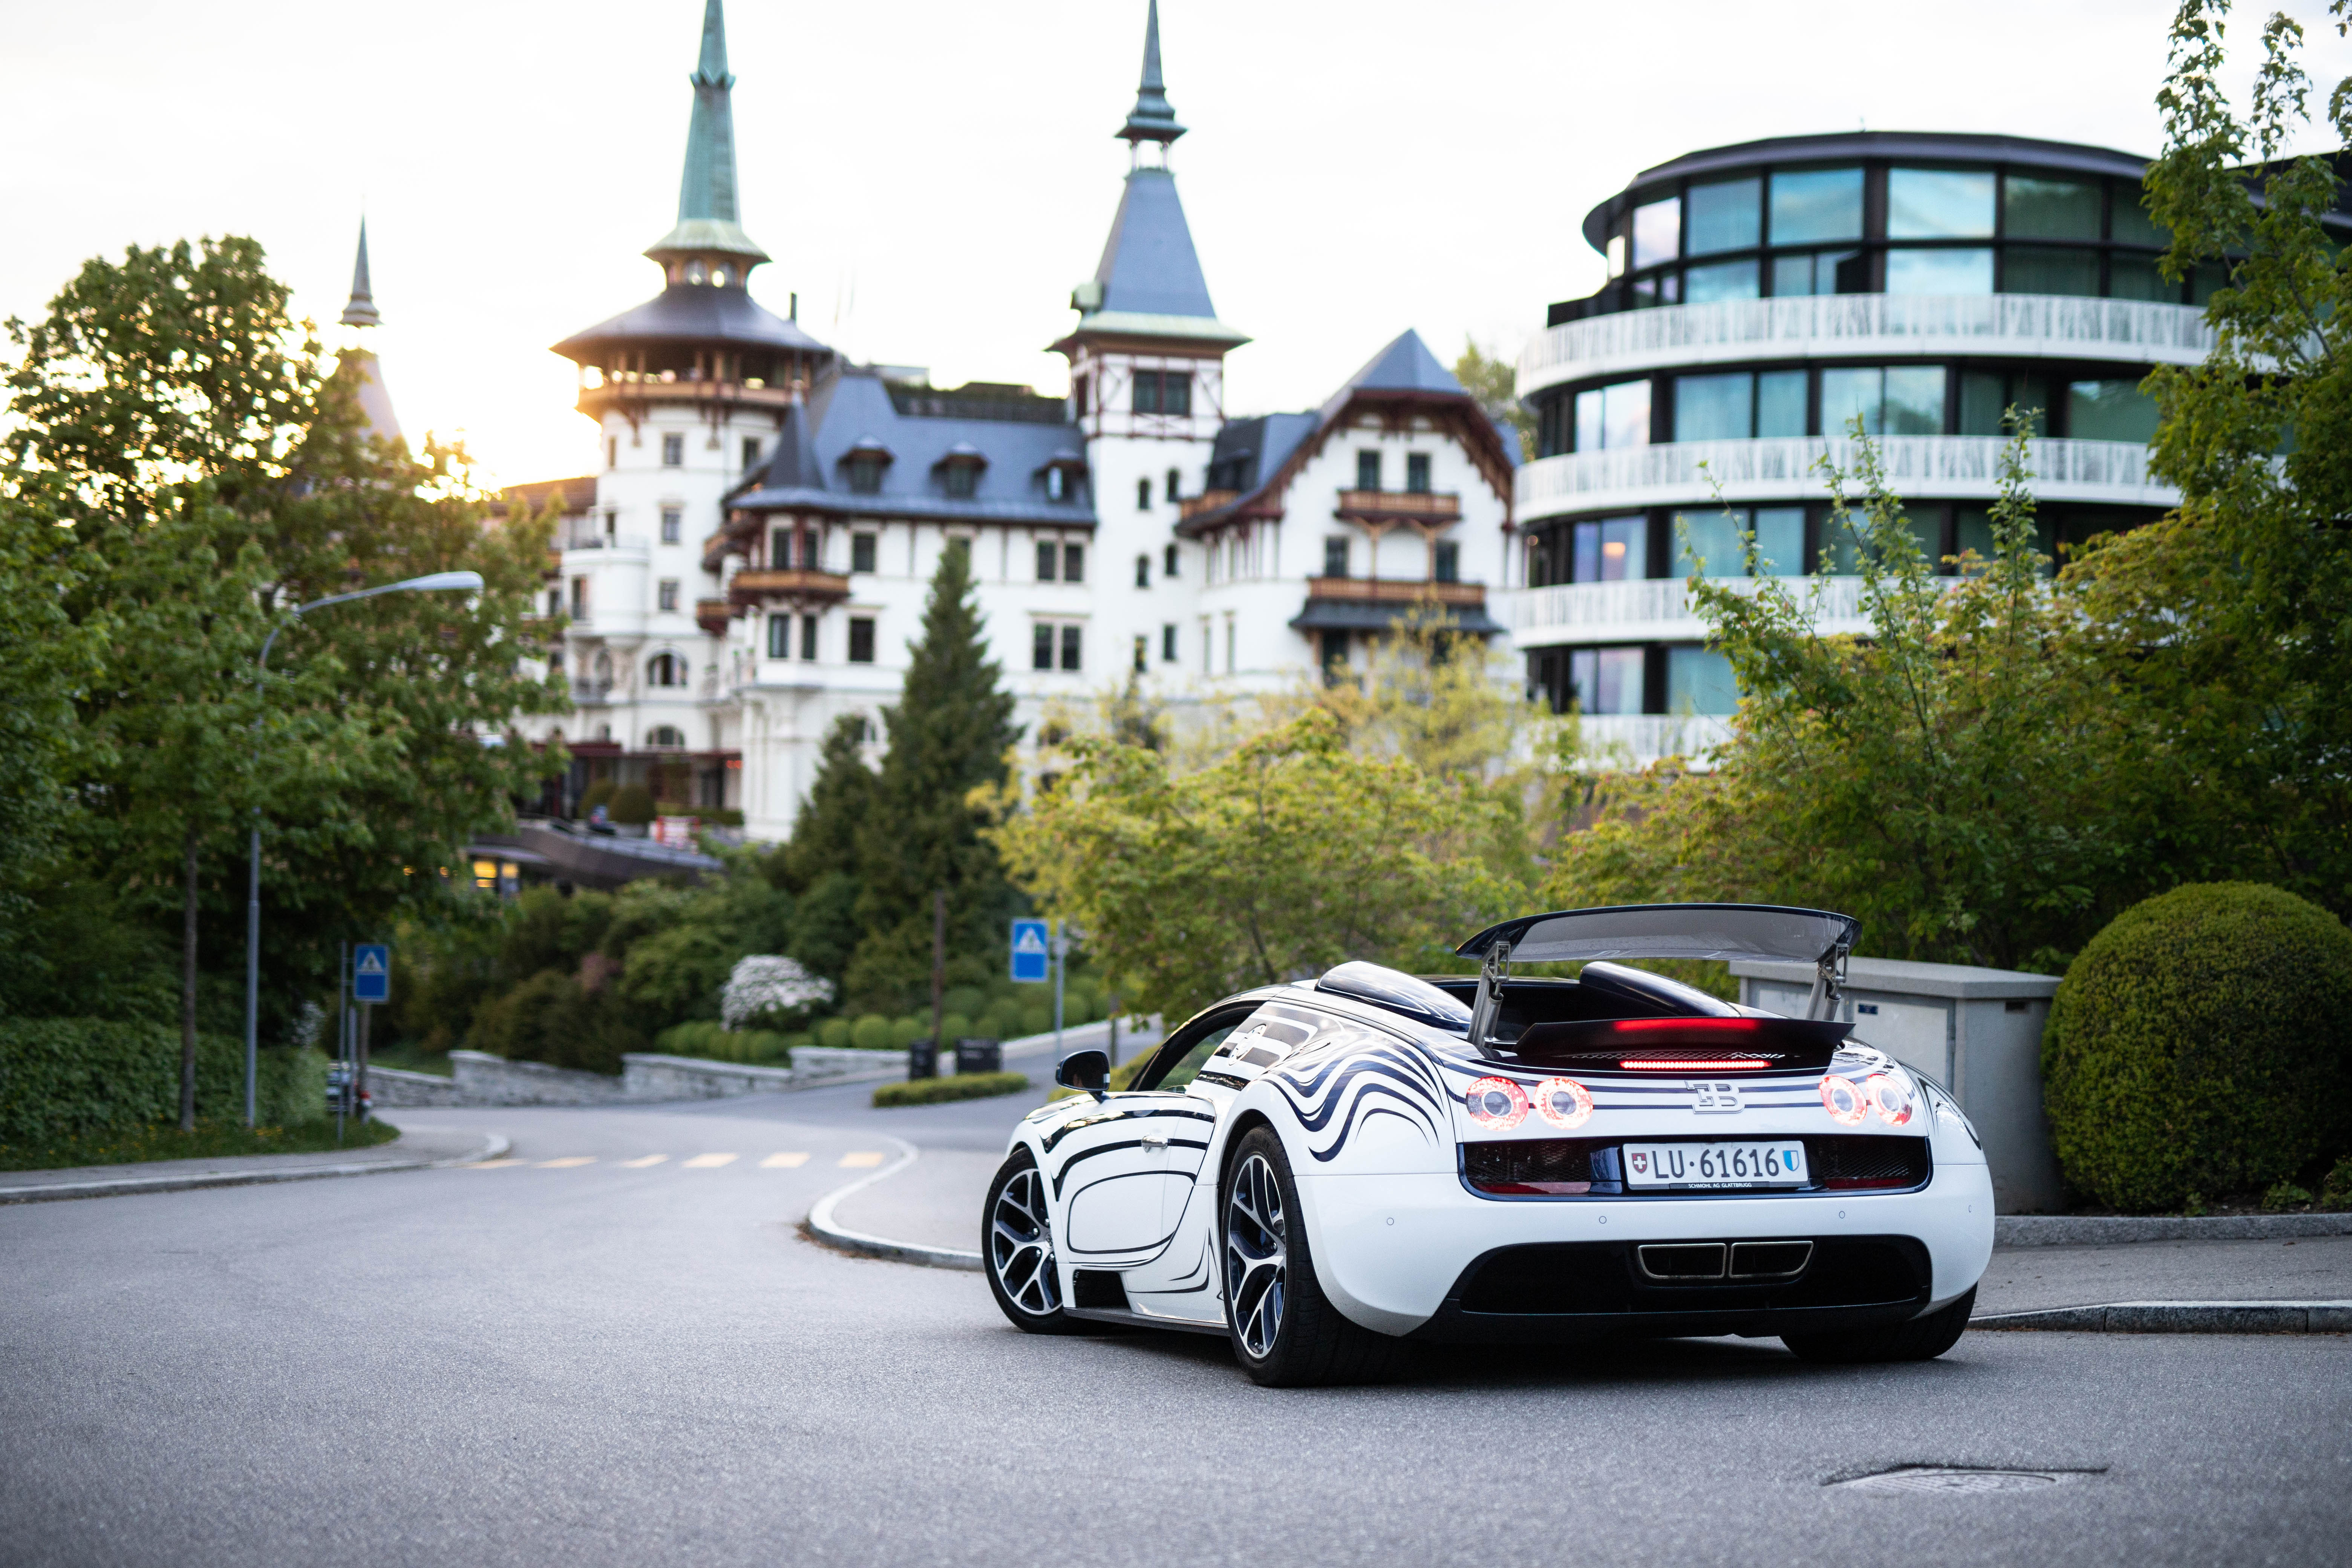 A picture of a white Bugatti Veyron against a city backdrop